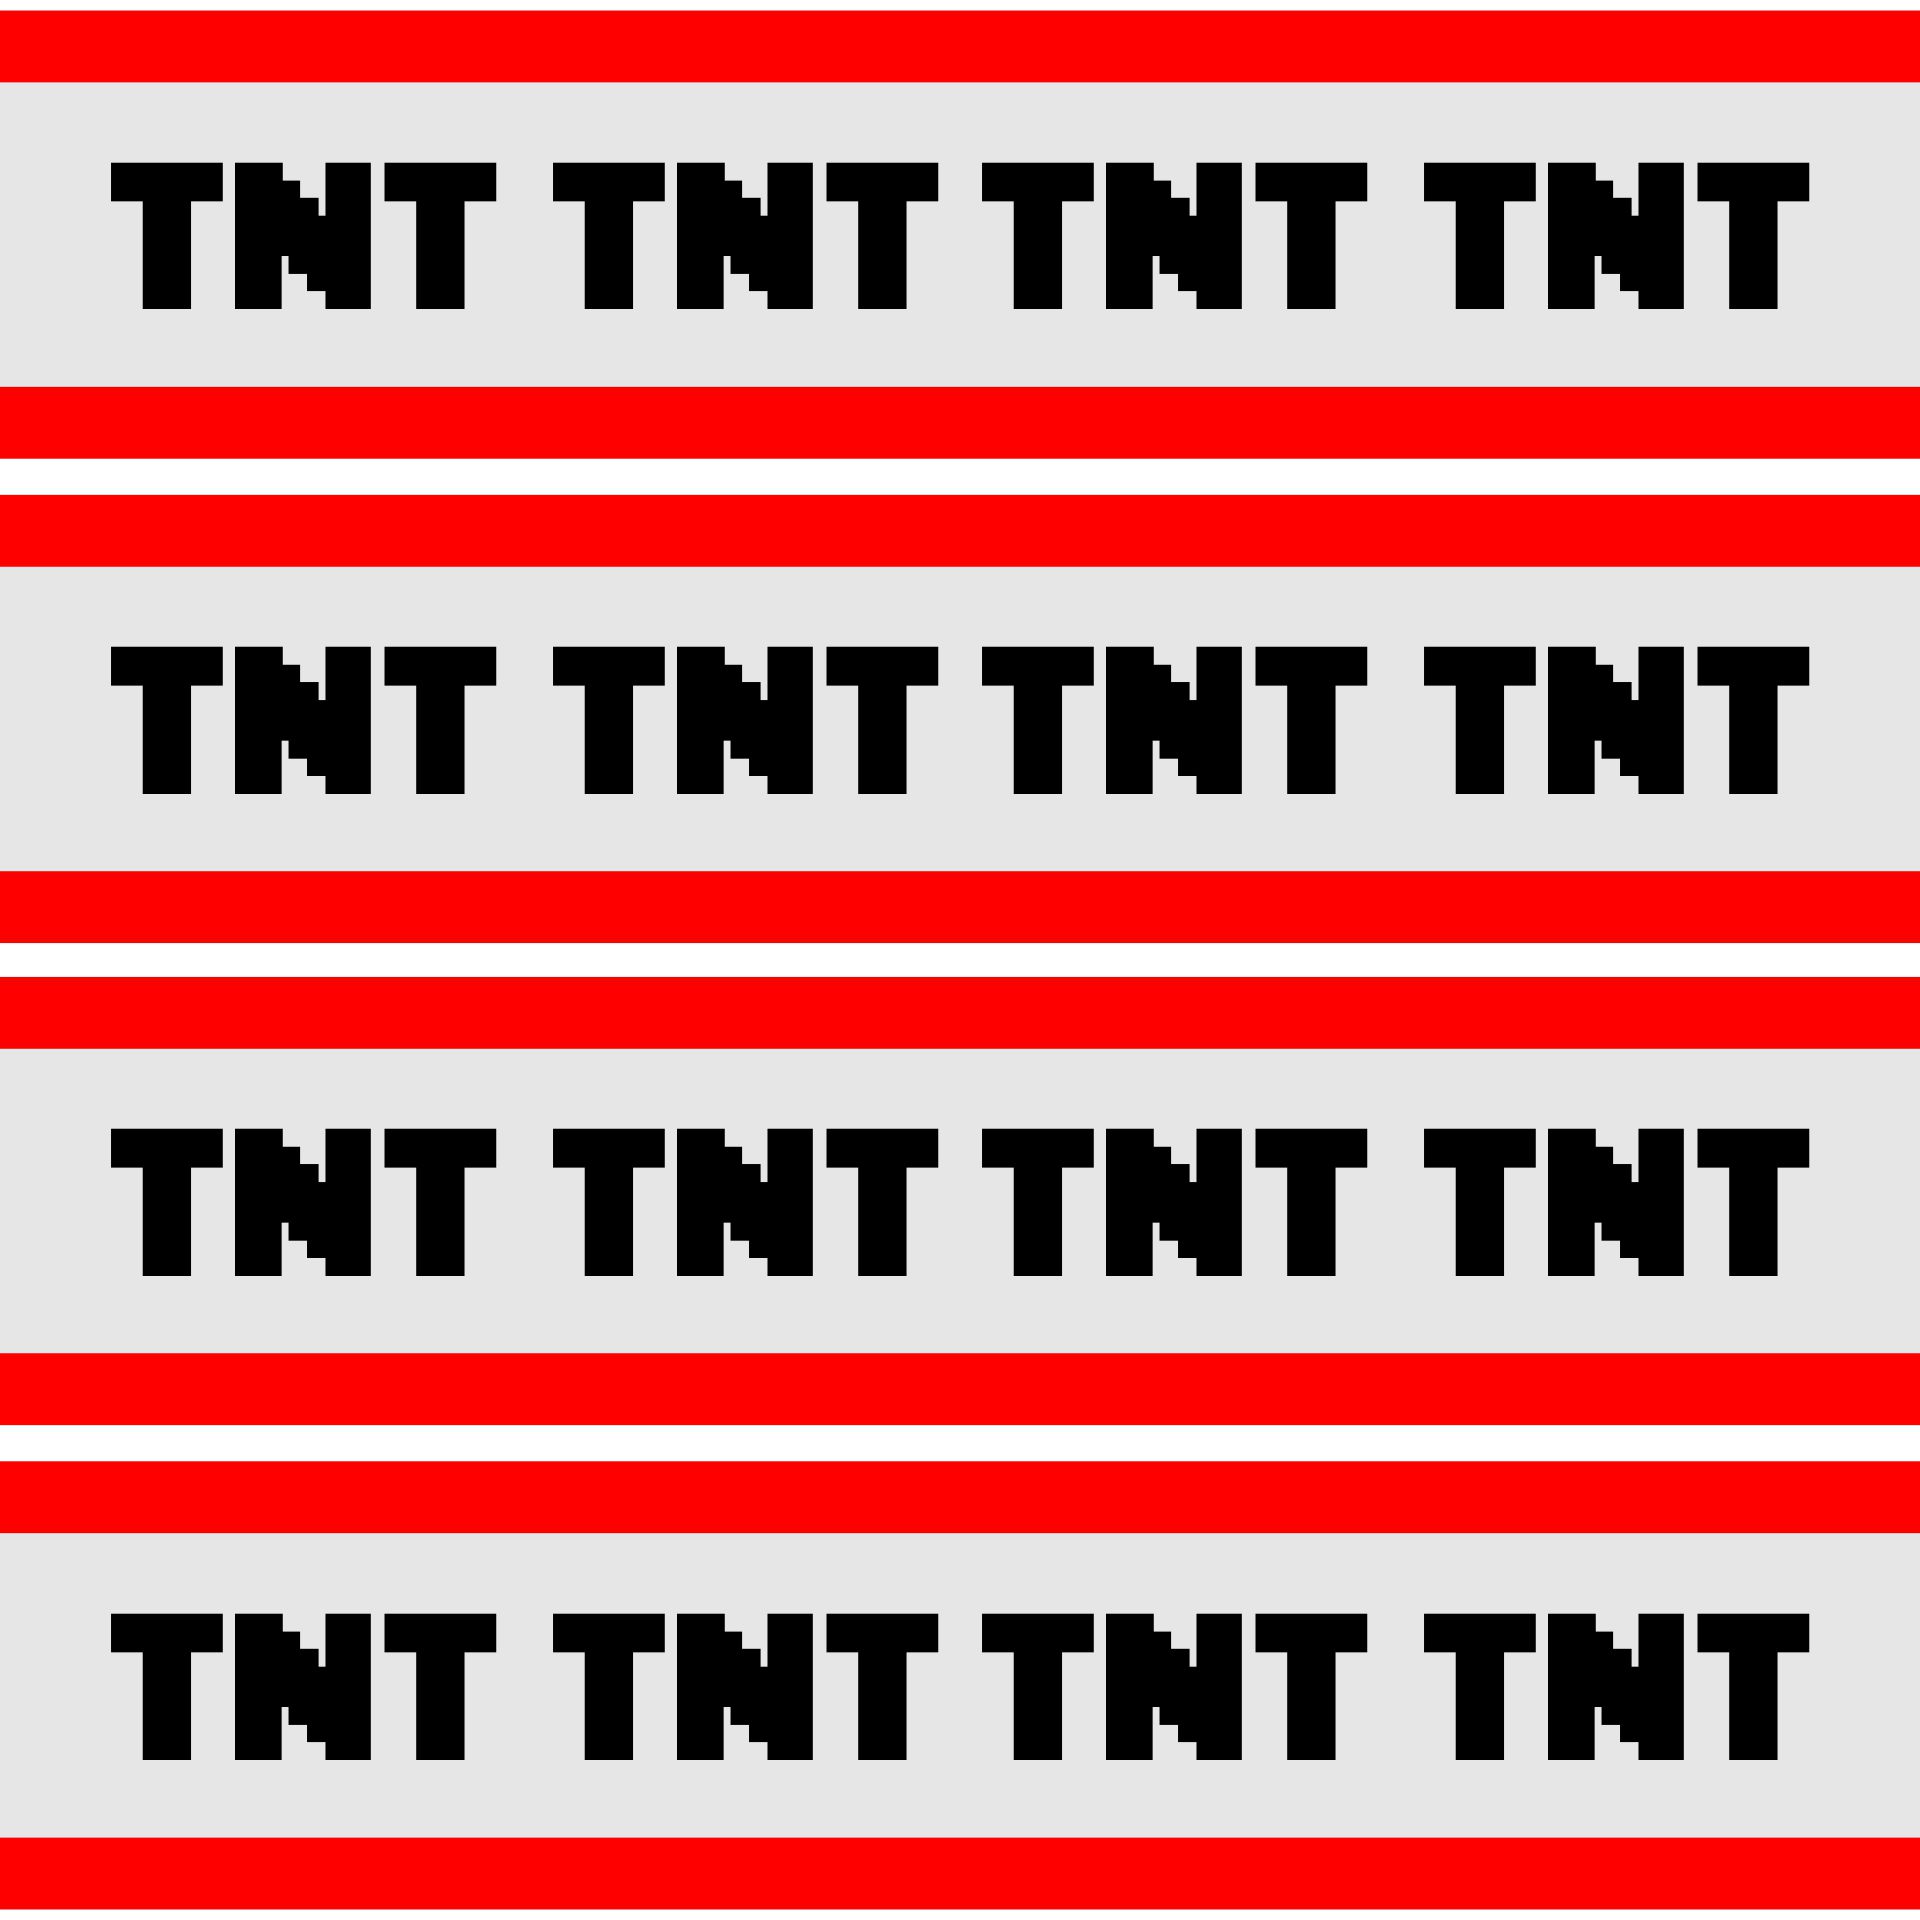 7-best-images-of-tnt-minecraft-party-printables-tnt-minecraft-party